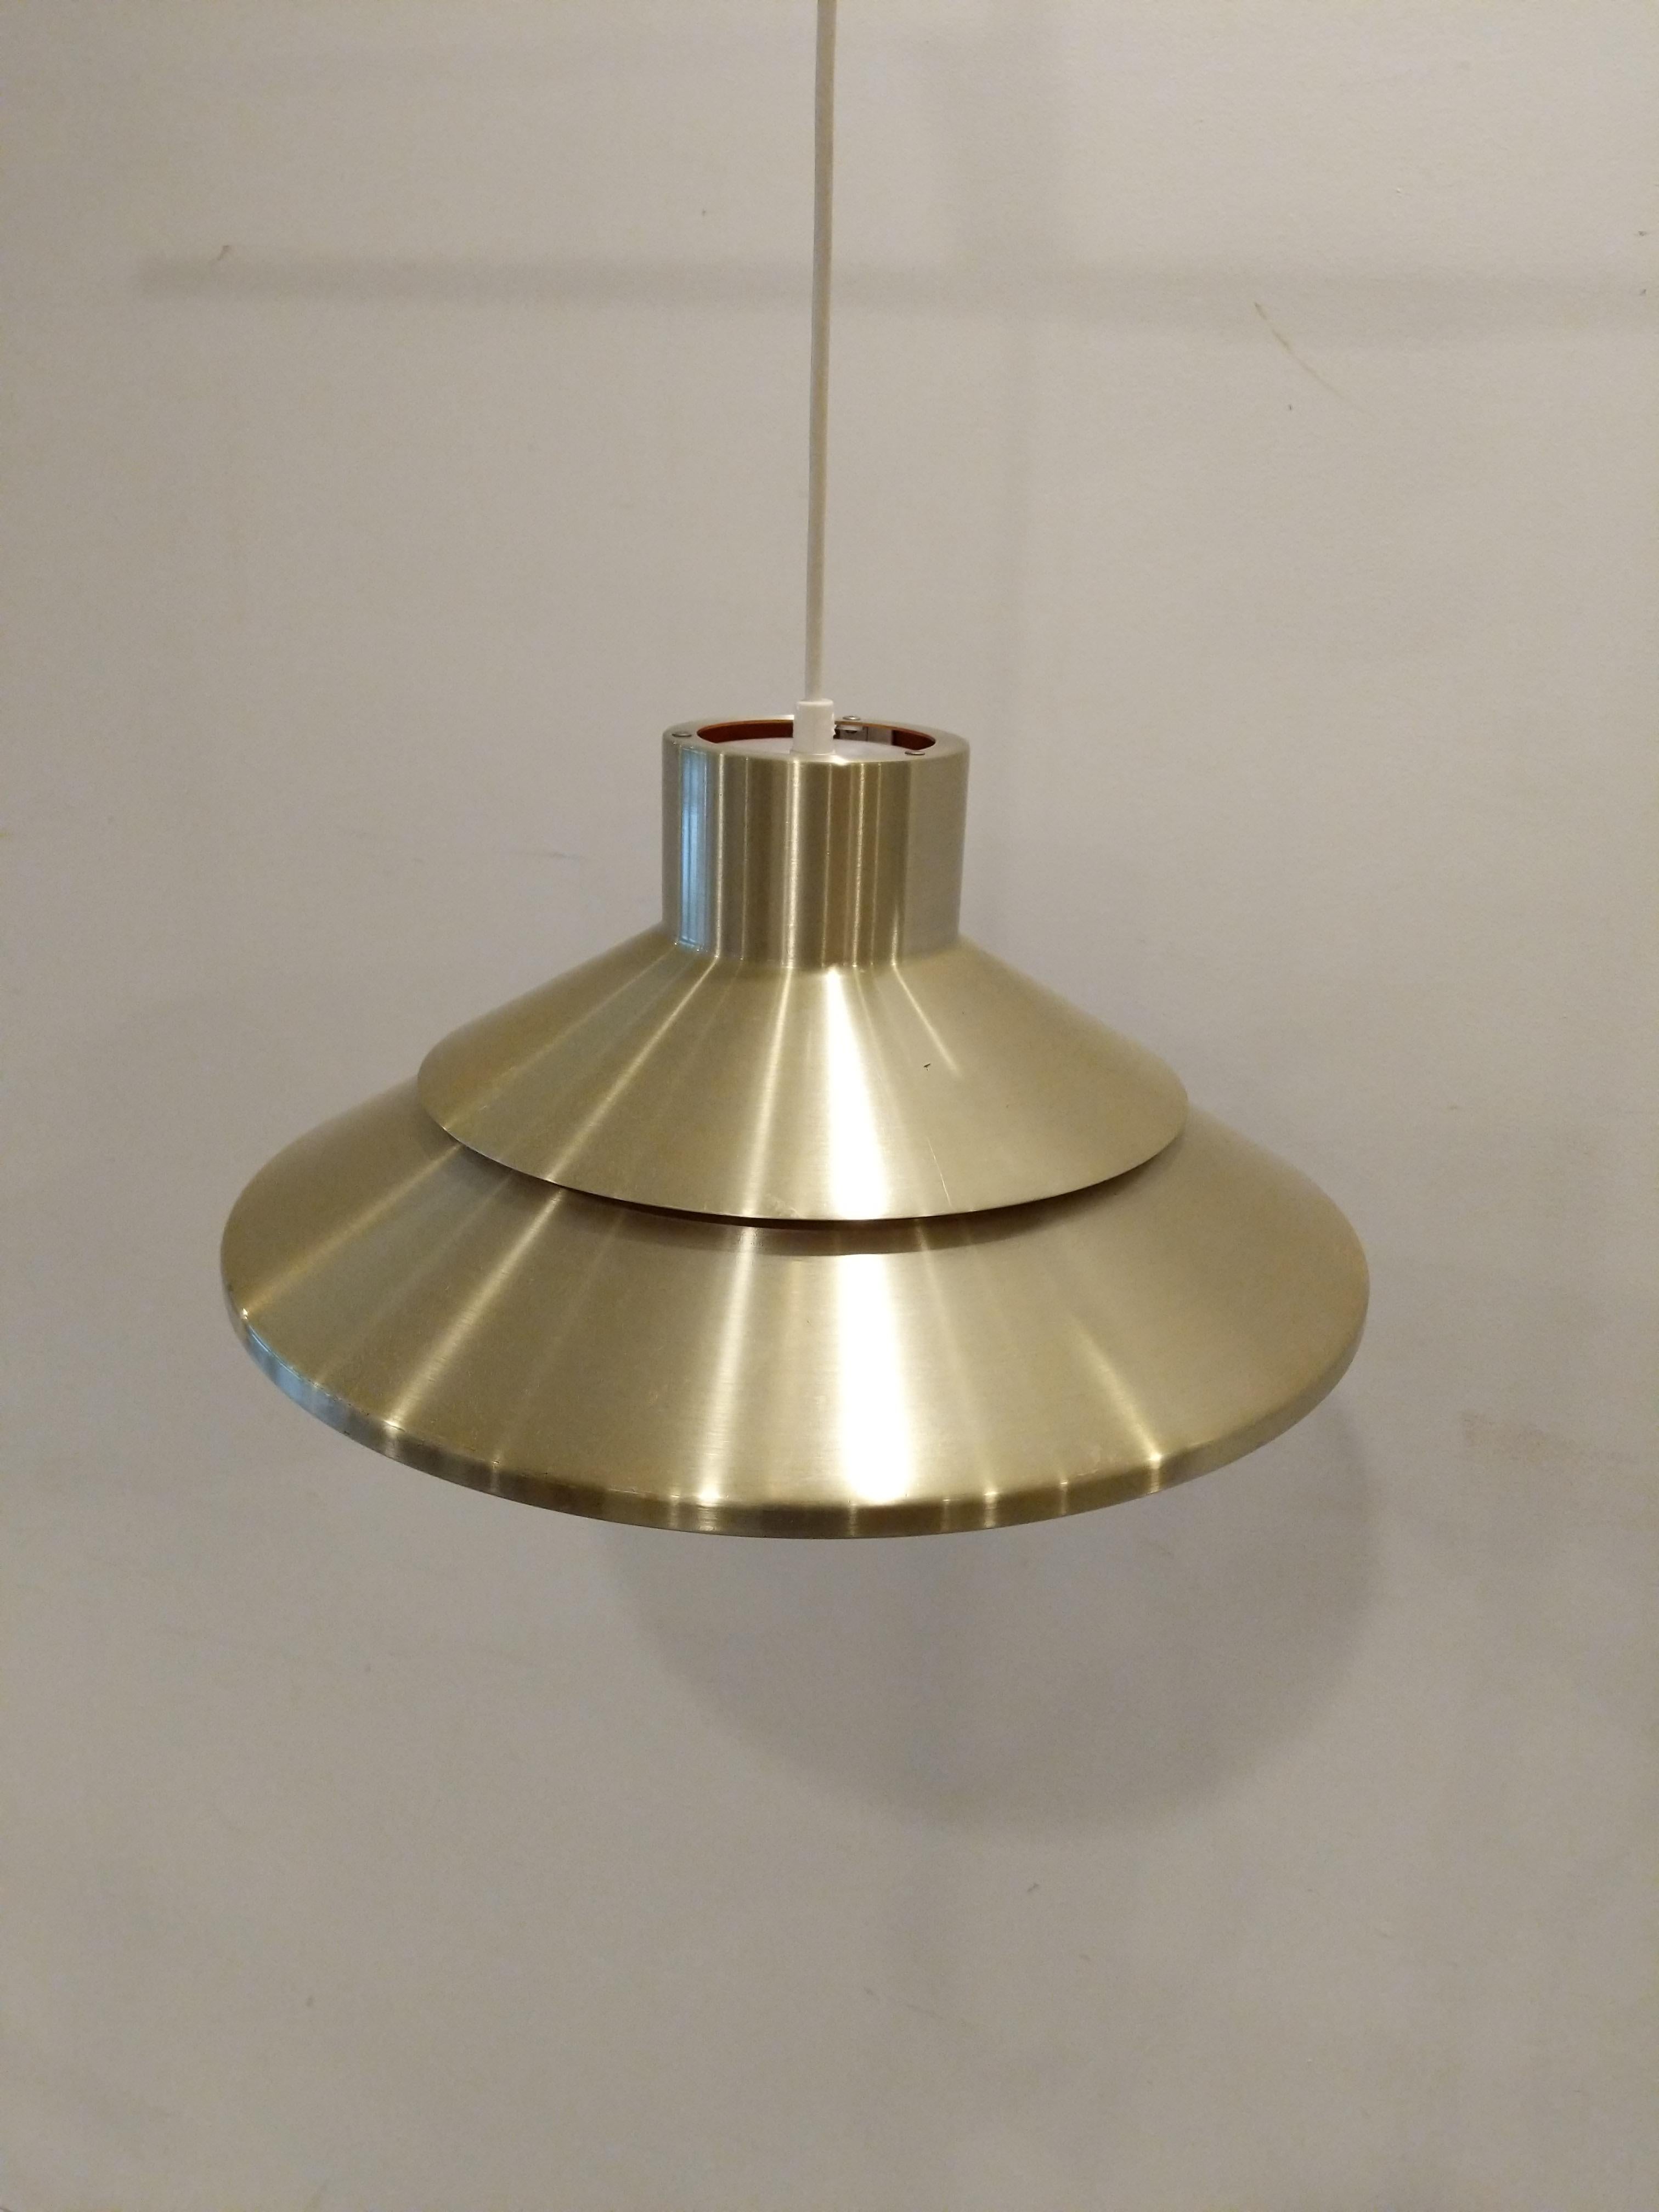 Authentic vintage mid century Danish / Scandinavian Modern hanging lamp / ceiling lamp / pendant light.

By Vitrika.

Imported directly from Denmark, this lamp is in great shape overall with minor wear from age (see photos).

The lamp is